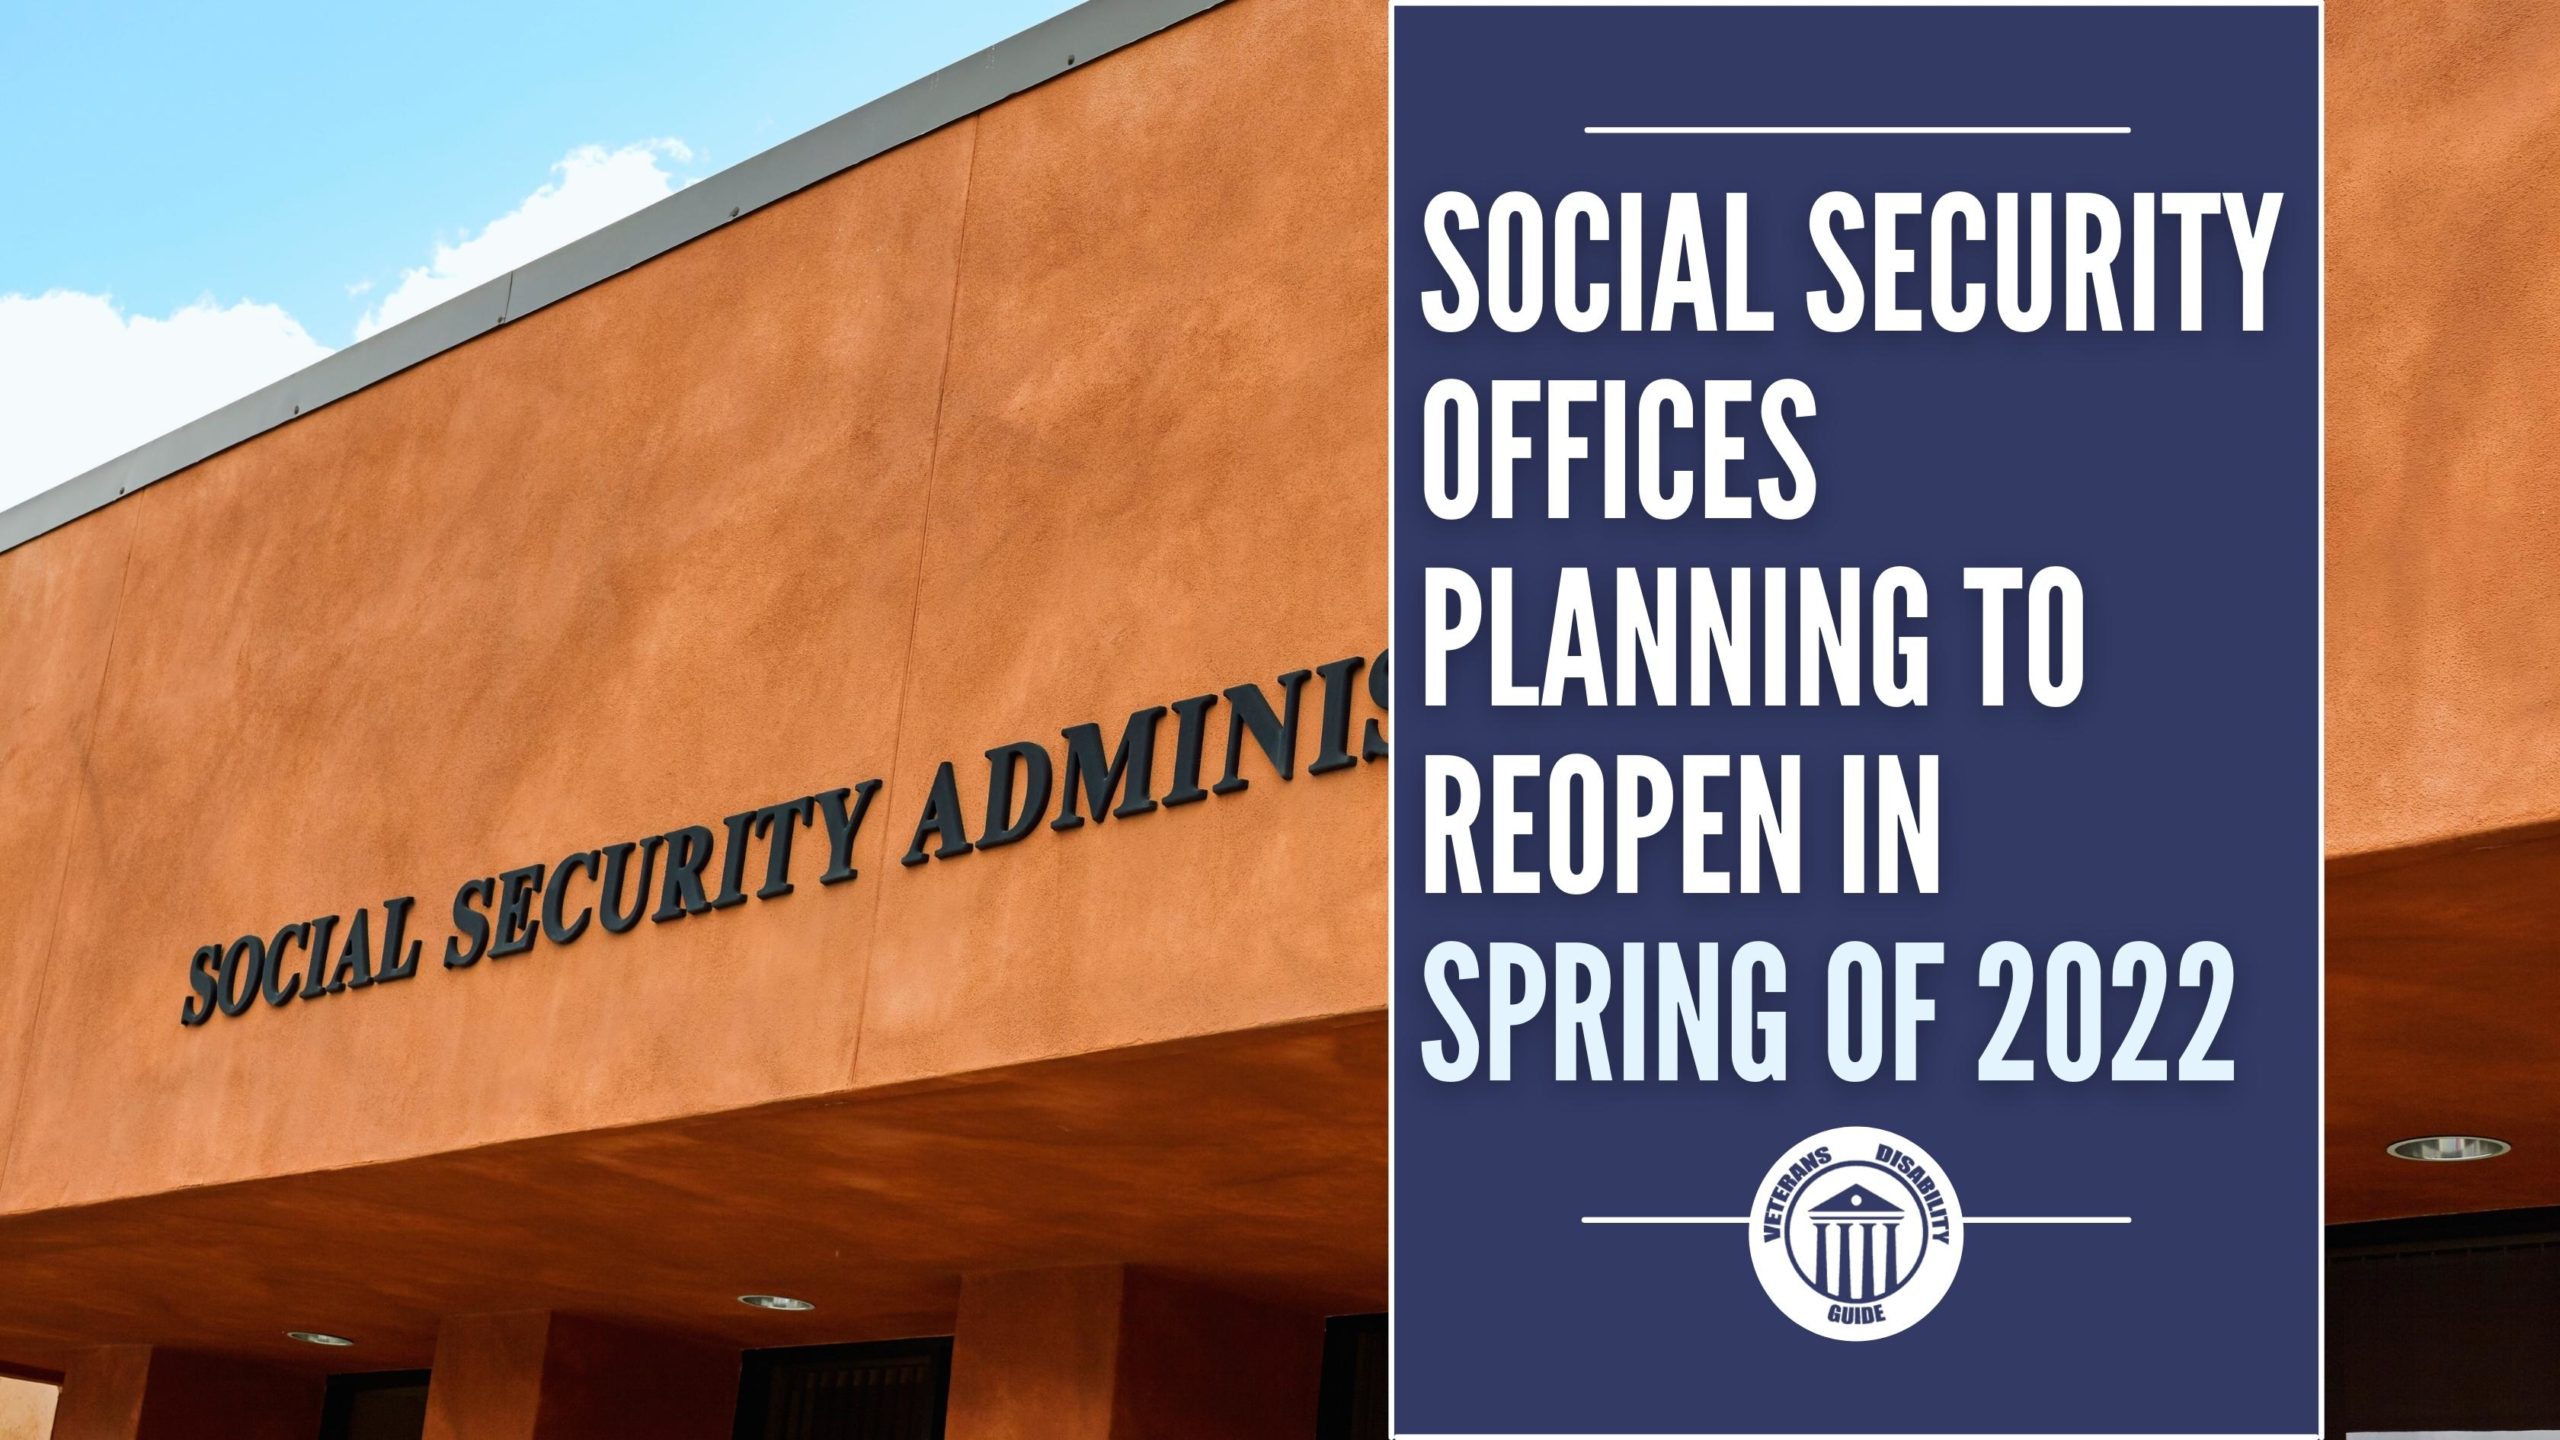 Social Security Offices Planning to Reopen in Spring of 2022 blog header image